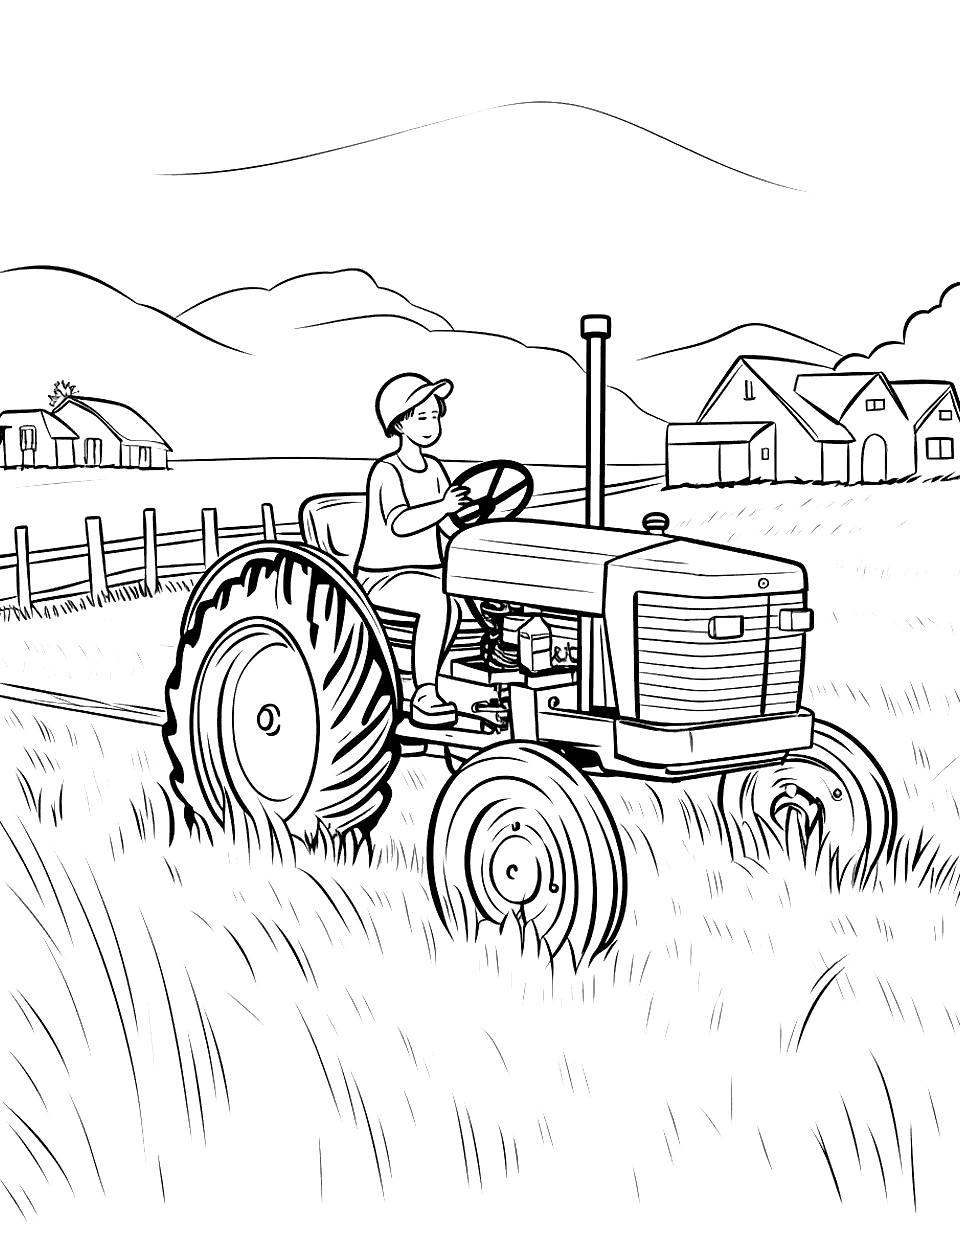 Tractor on the Farm Coloring Page - A tractor on the farm field ready to start working on the plots.